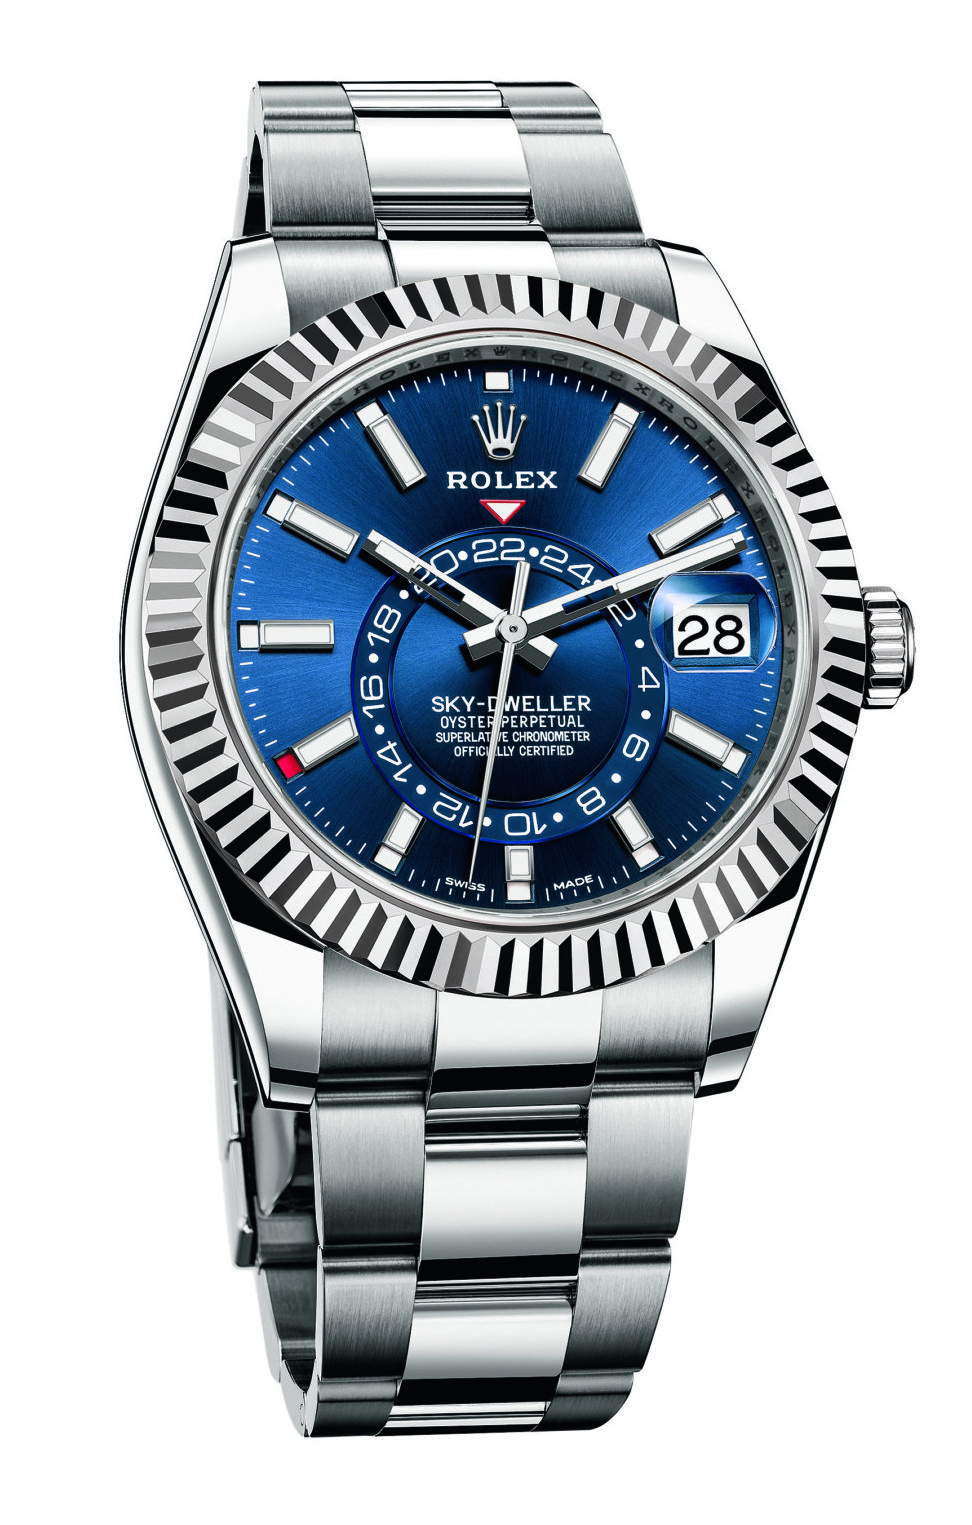 The oyster perpetual sky-dweller in rolesor with a blue dial was the best piece of the year from rolex, says mr toulson.